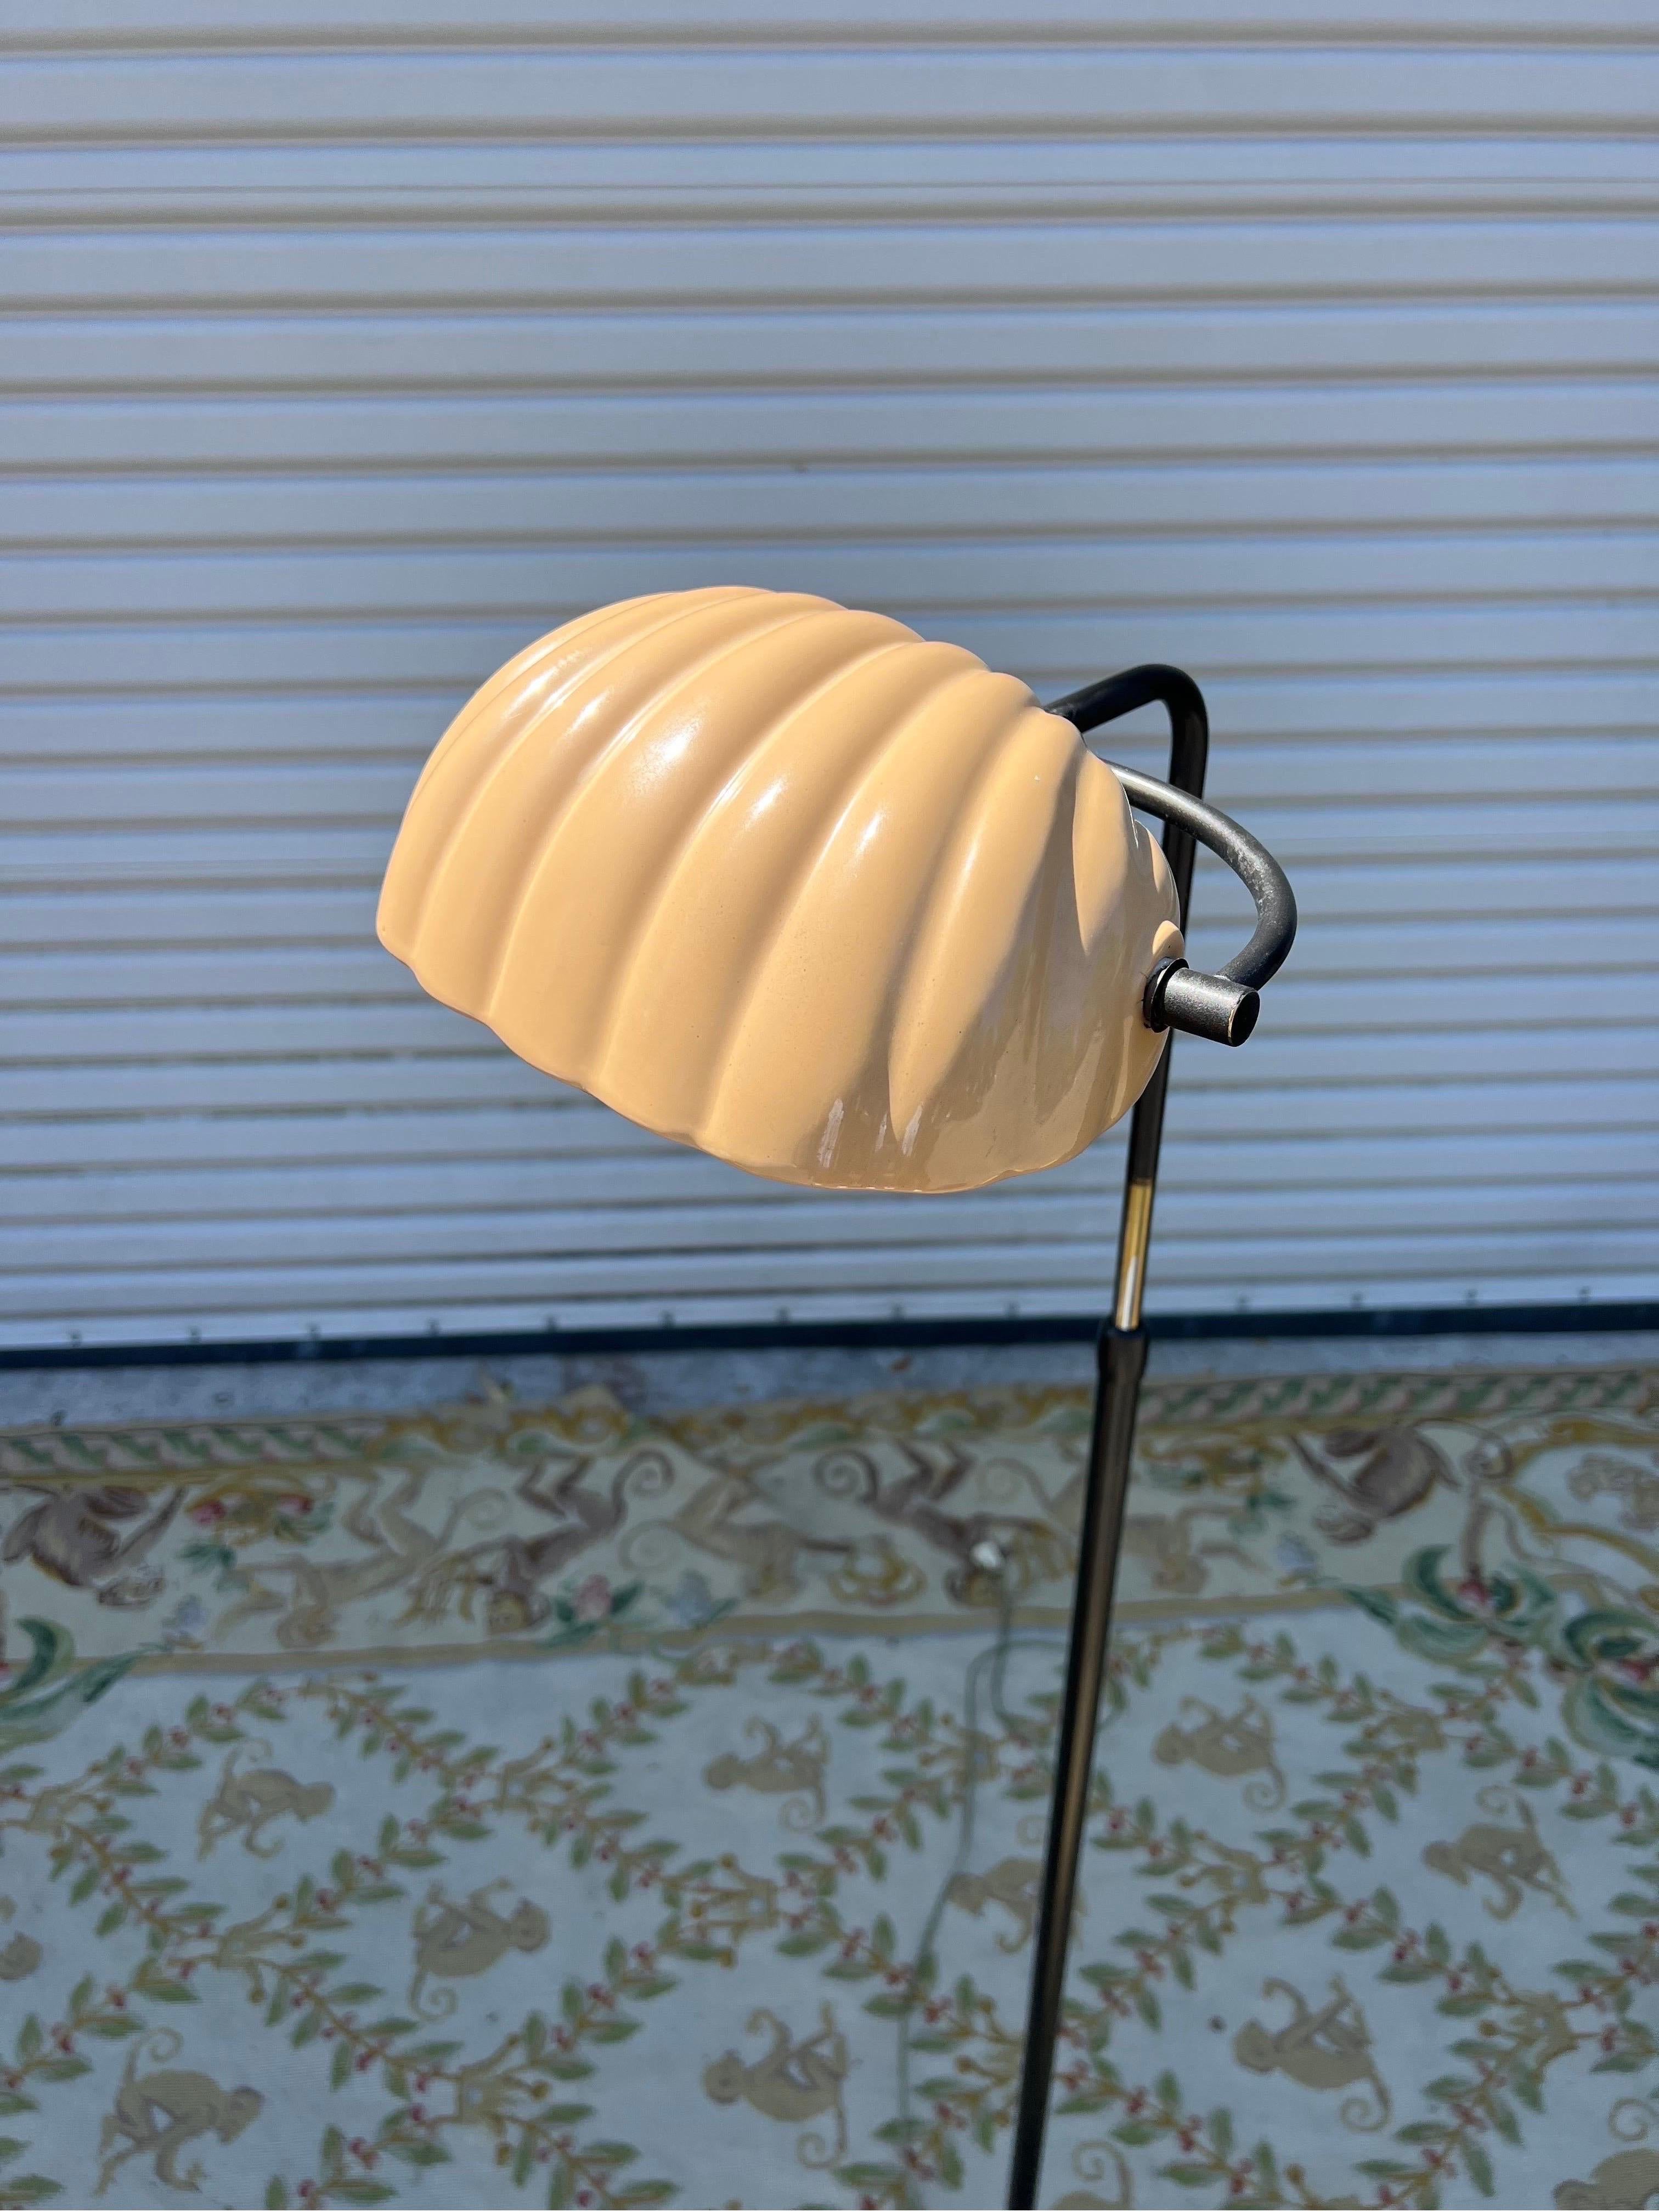 circa 1960s Italian reading lamp. Pivoting ceramic scallop shell shade on adjustable height base in the manner of Tommaso Barbi. The porcelain shade reminds me of Farrow and Ball “Setting Plaster”, being a timeless neutral.